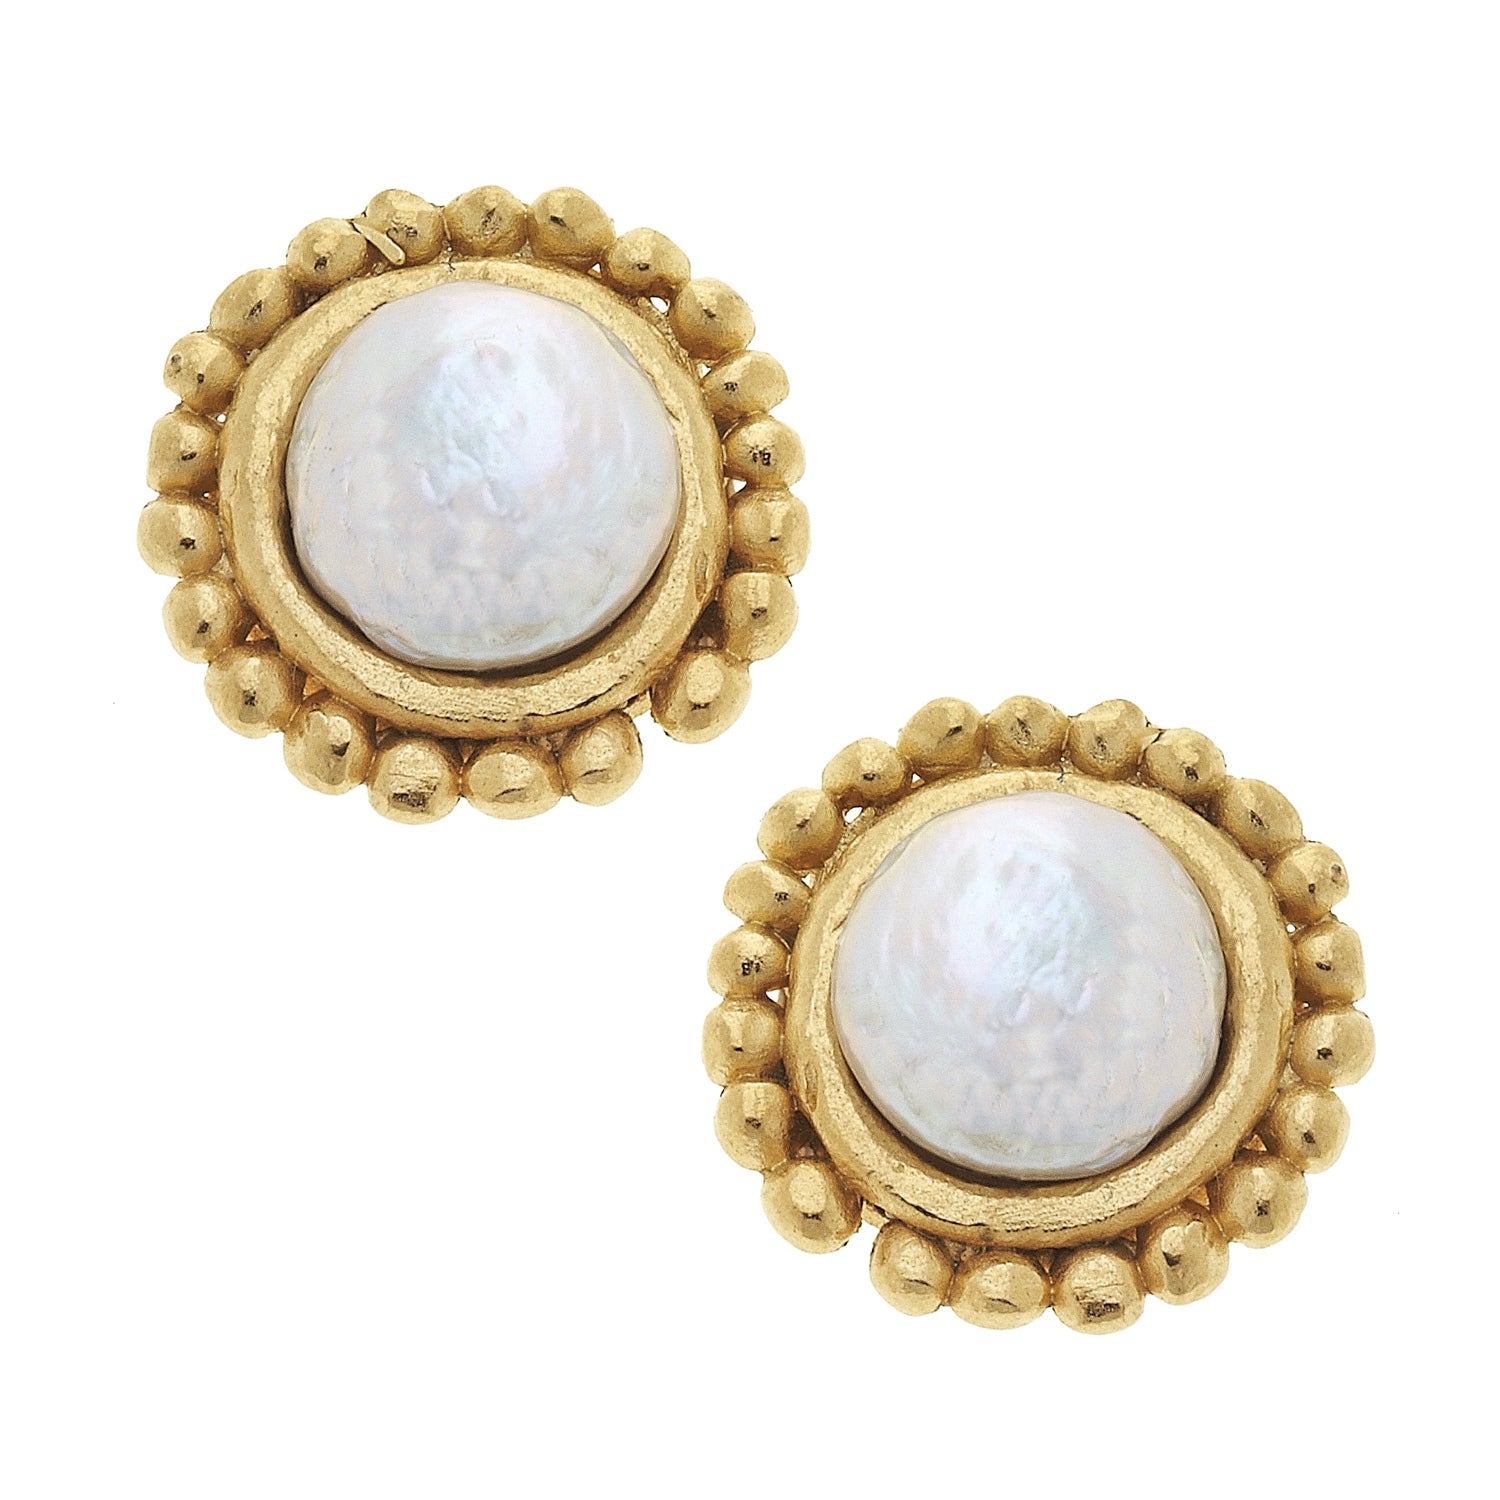 Dotted Coin Pearl Earrings_EditedNC